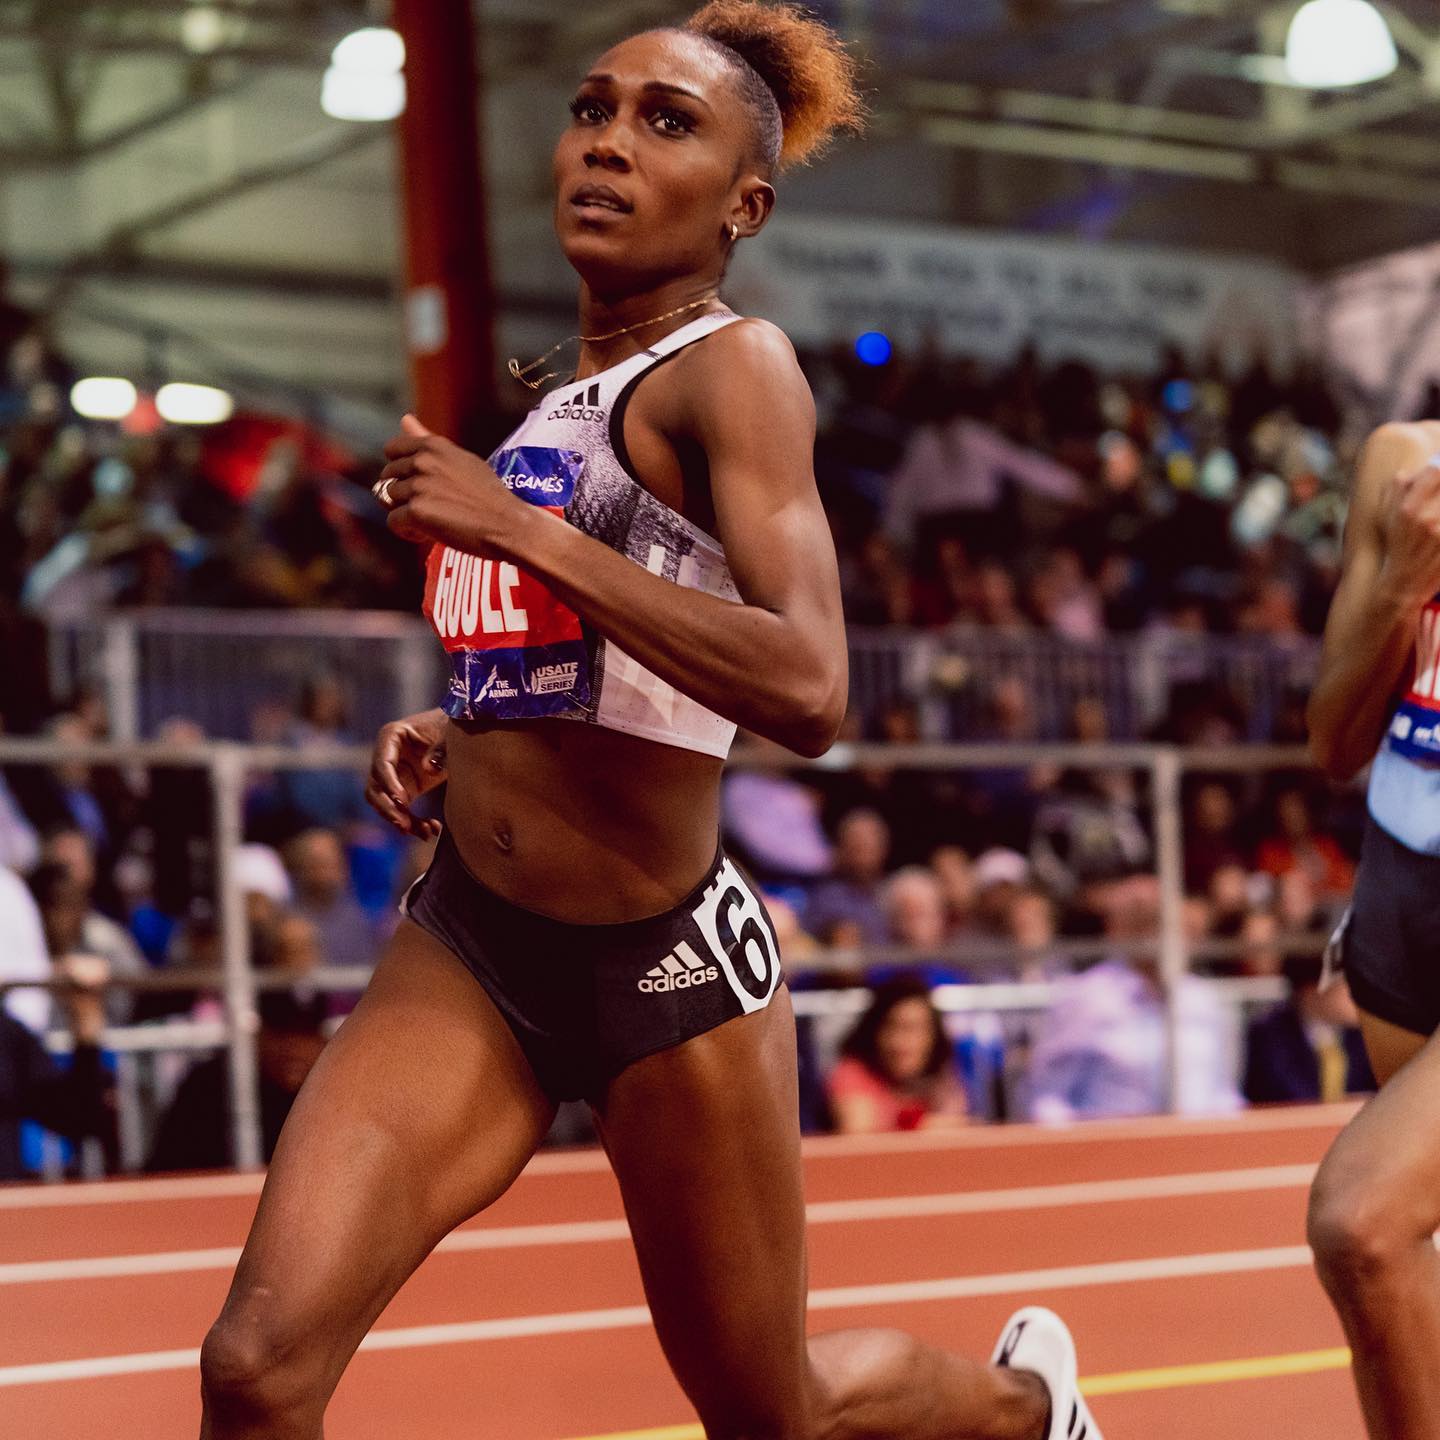 Goule-Toppin faces Mu at 114th Millrose Games